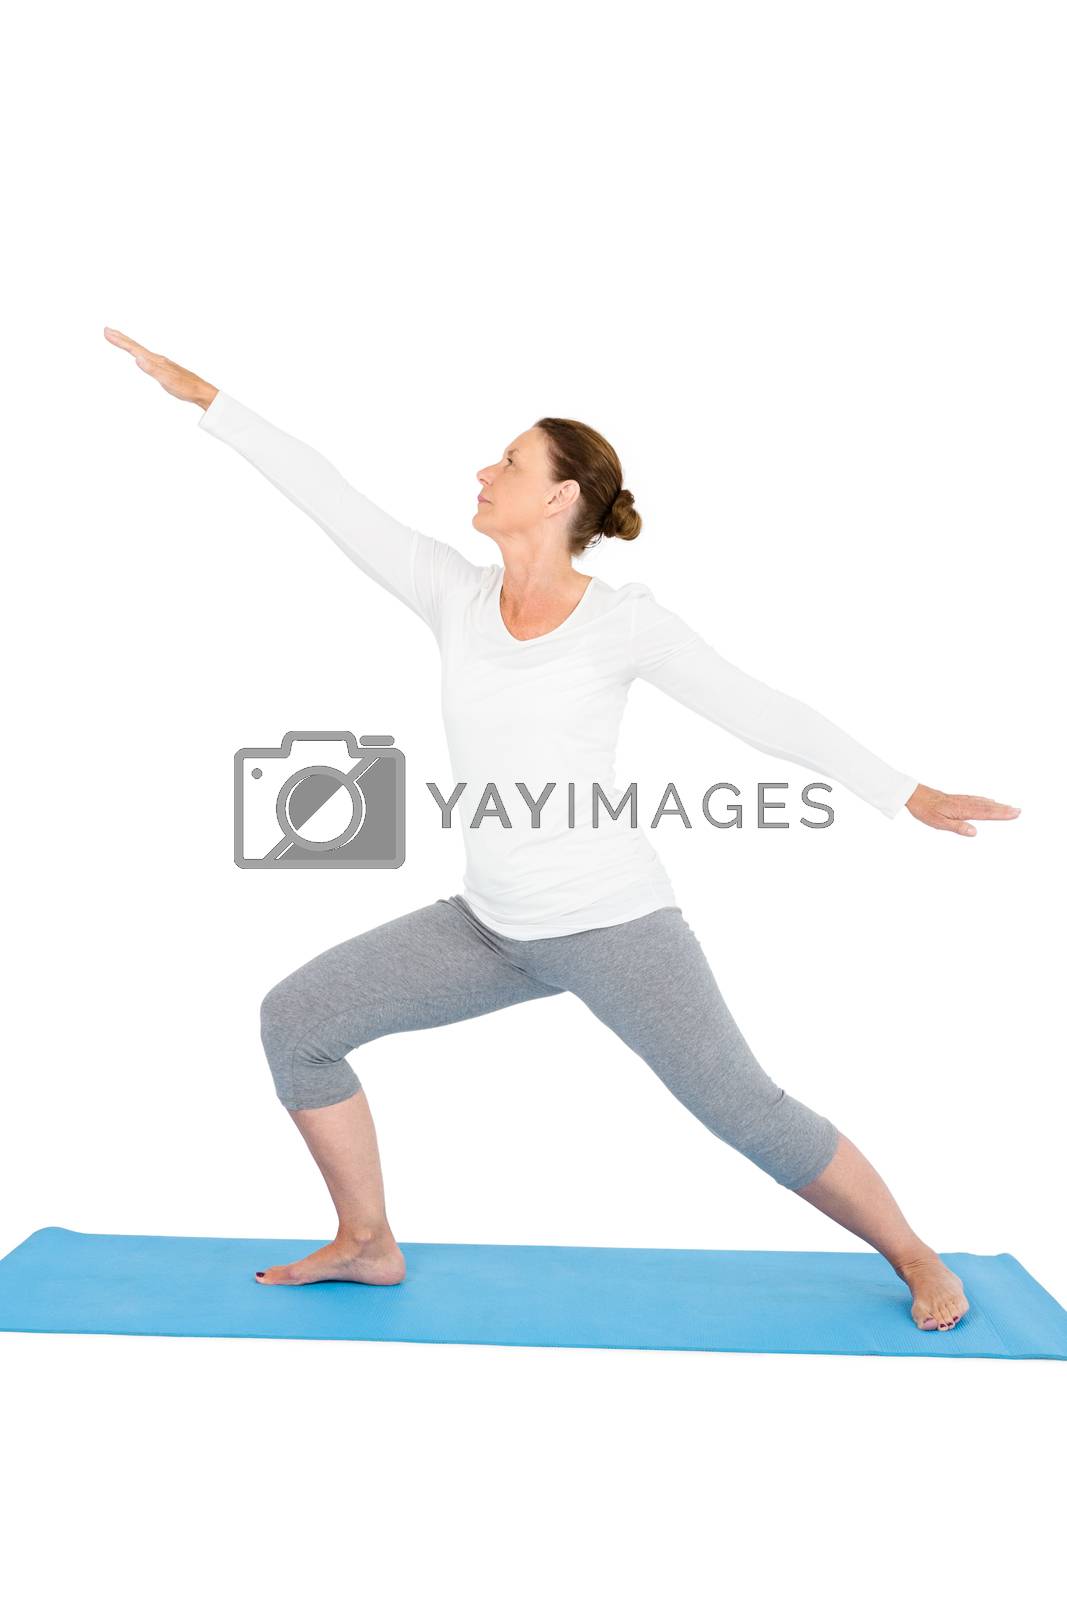 Royalty free image of Full length of woman with arms outstretched while exercising by Wavebreakmedia